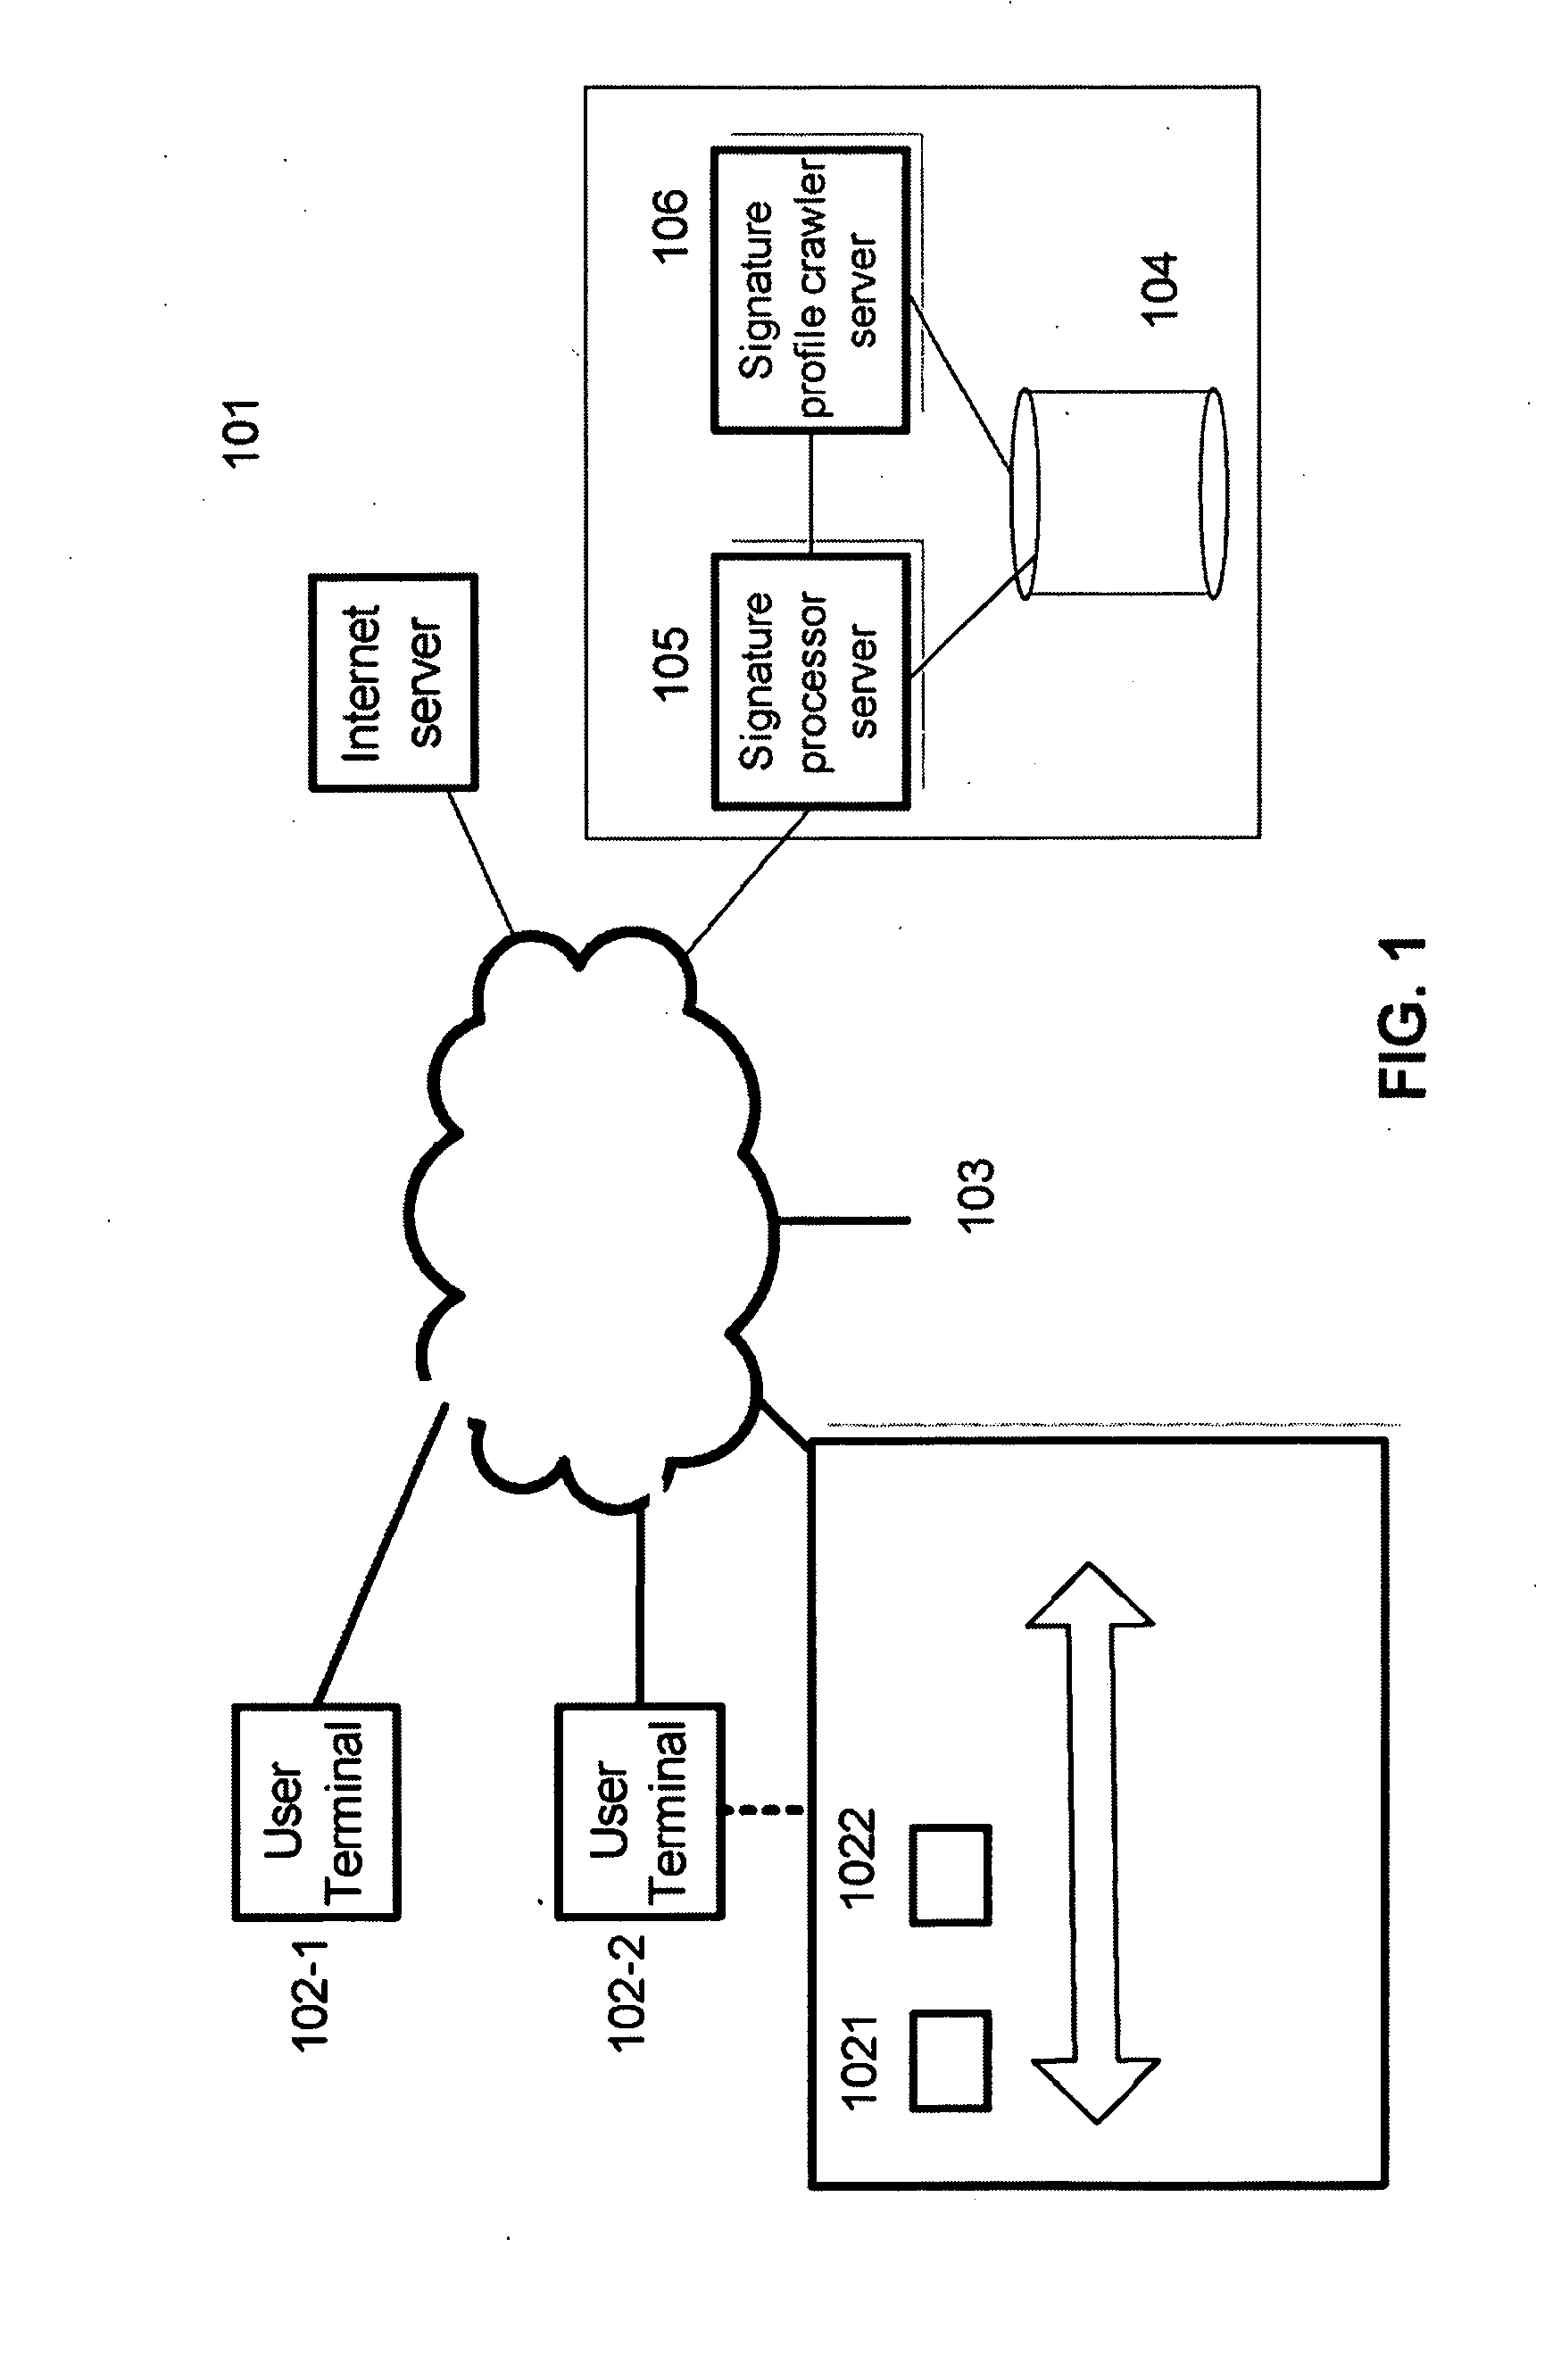 Method and system for providing personalized web experience